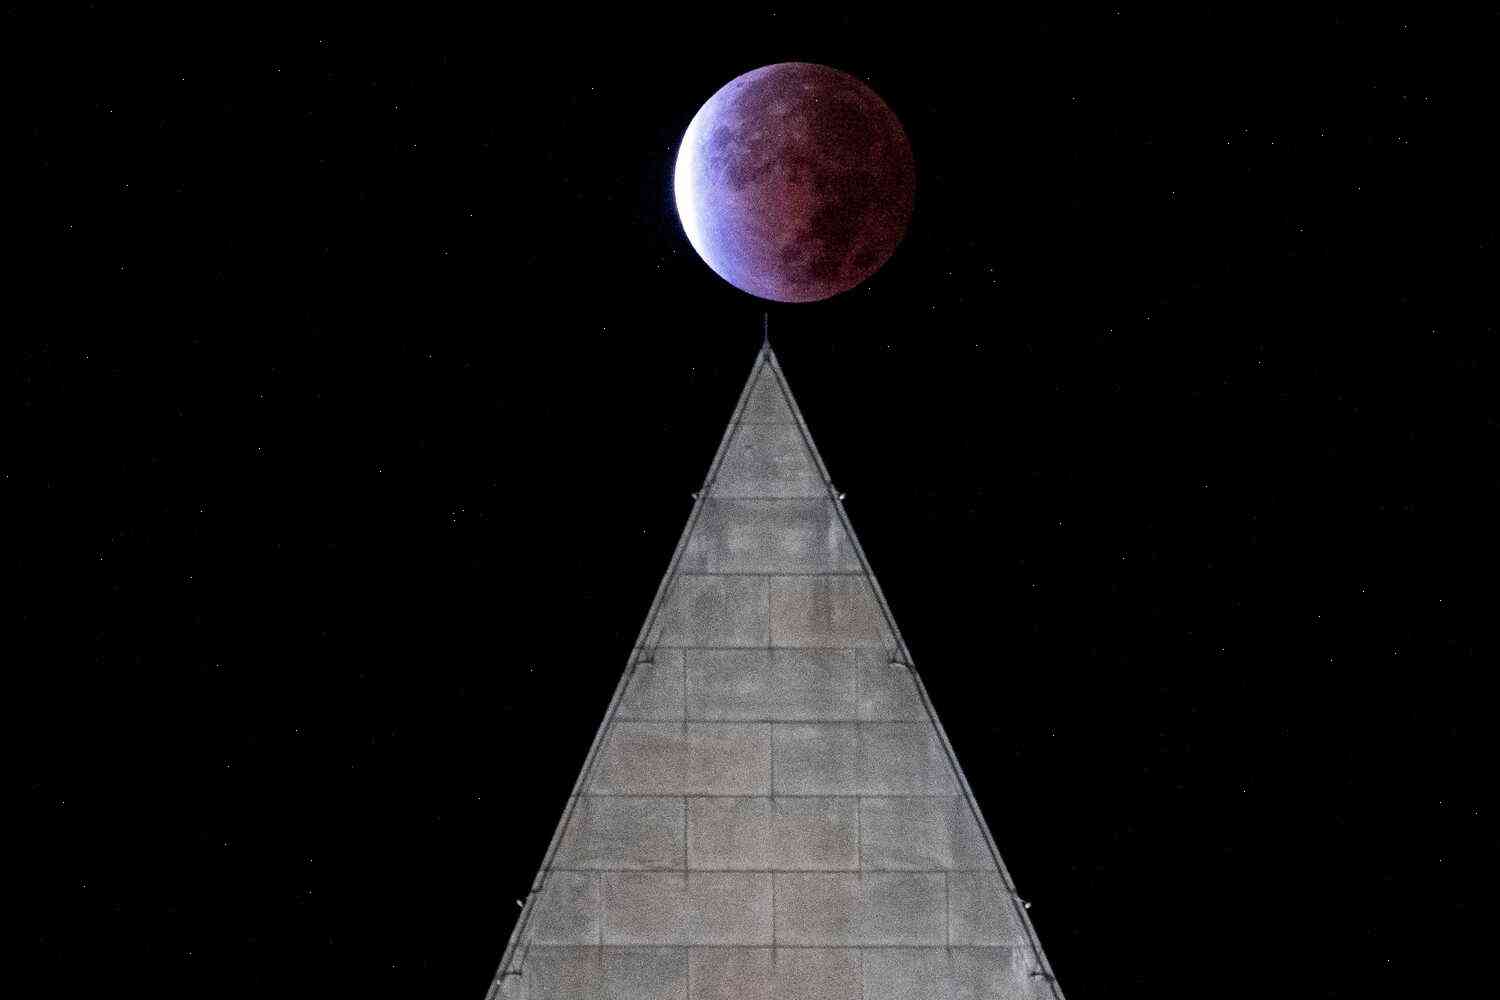 The Earth will be turned into a shell by a lunar eclipse